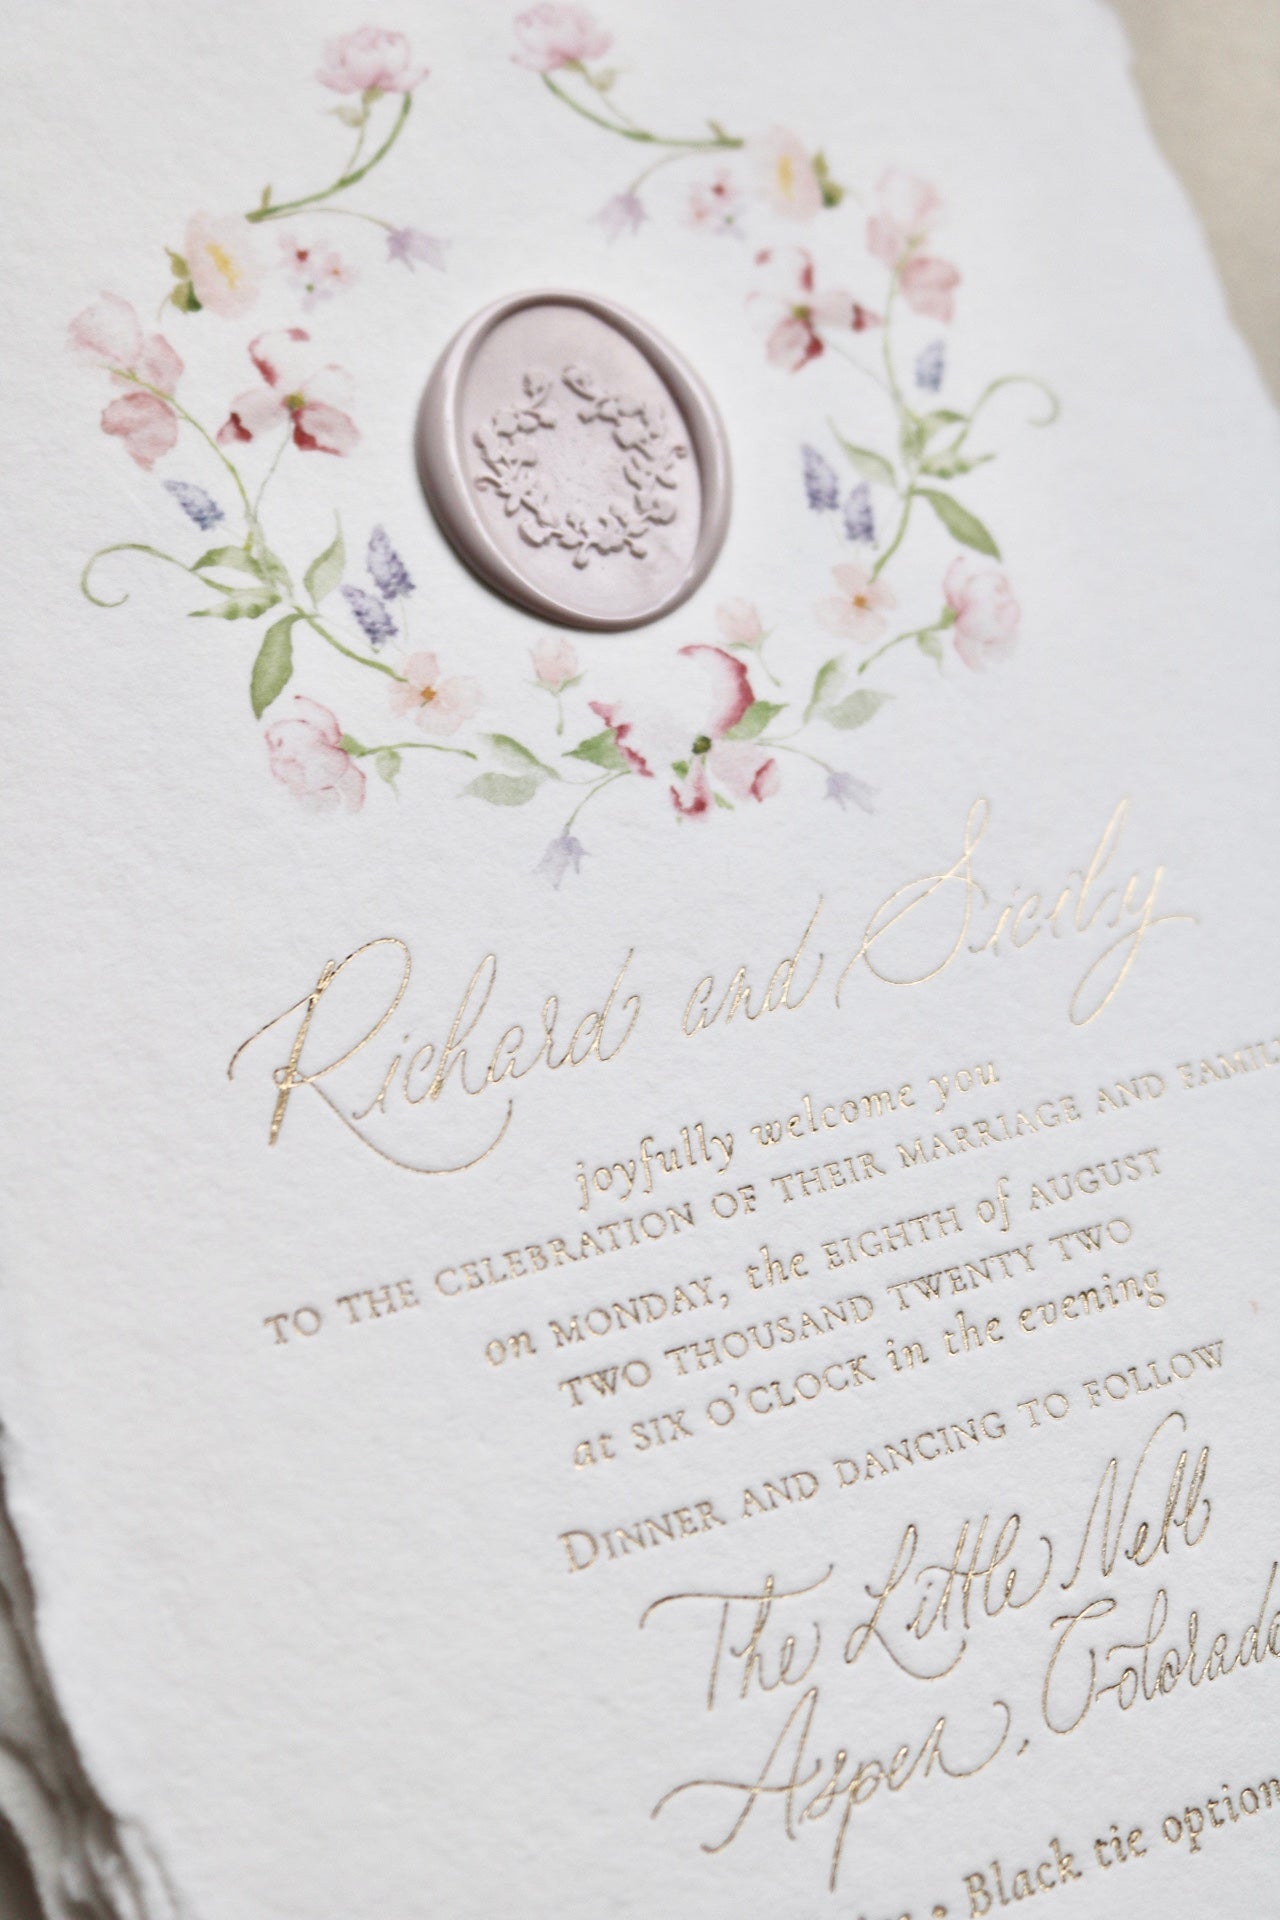 Transform your wedding stationery with hot foil printing on handmade paper. Expert tips and stunning examples await in our latest post.